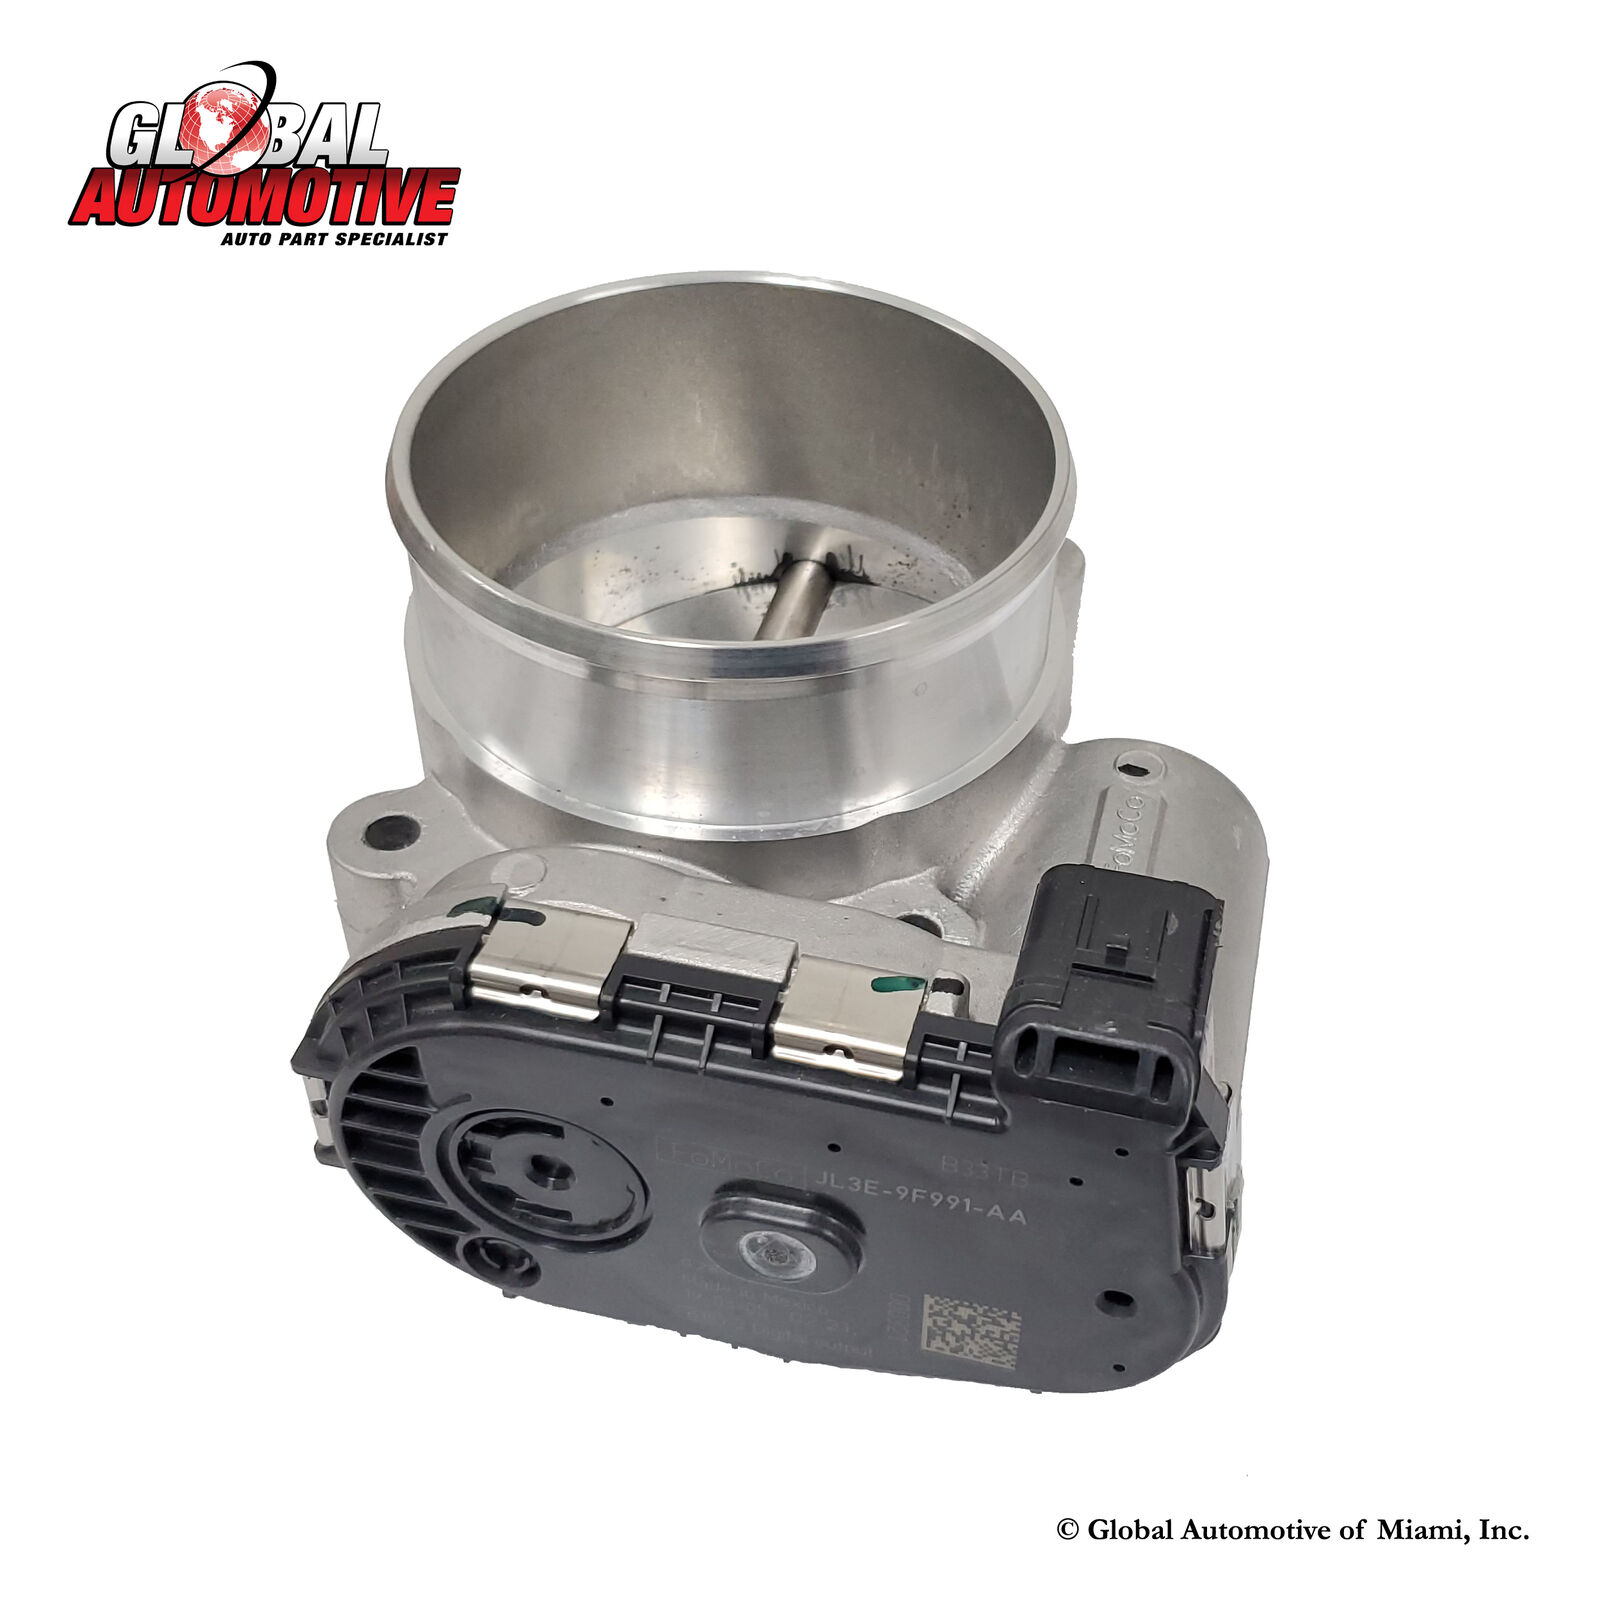 Genuine Ford JL3Z9E926A Throttle Body for 2018-2020 F150 Pickup & Mustang 5.0L